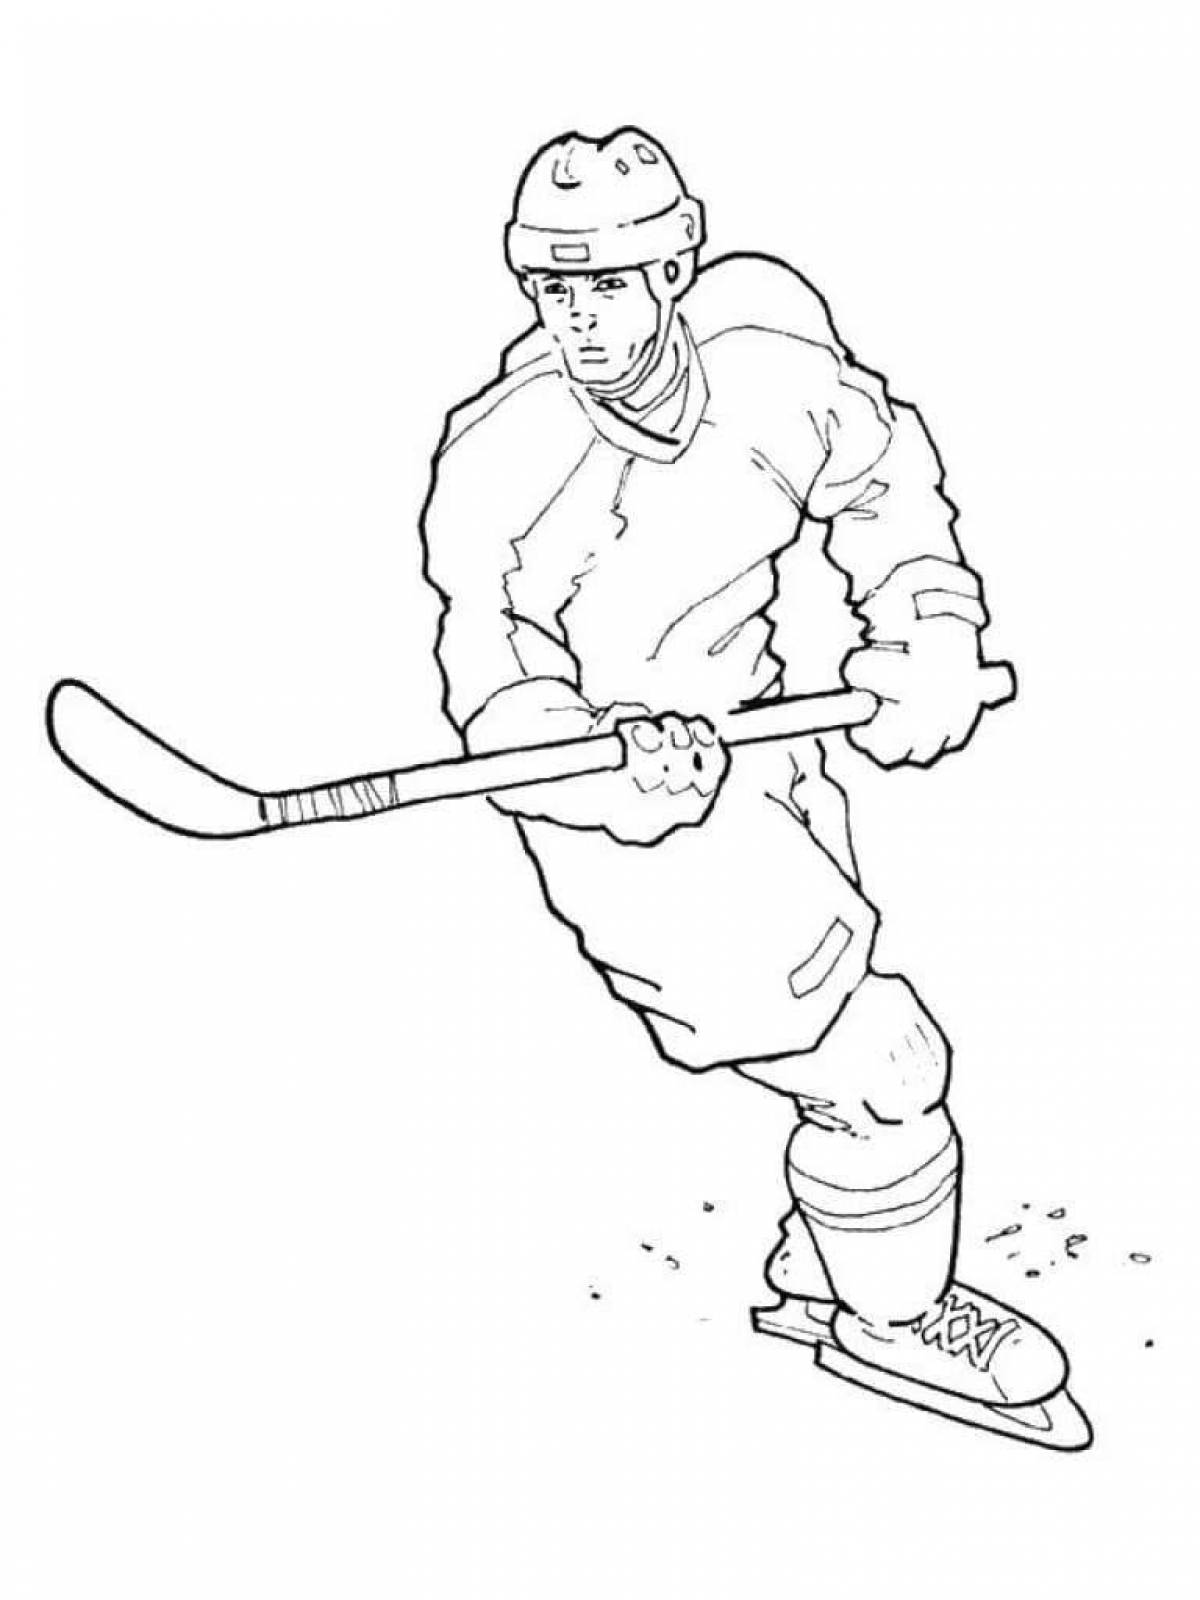 Fabulous coloring pages of hockey players for kids